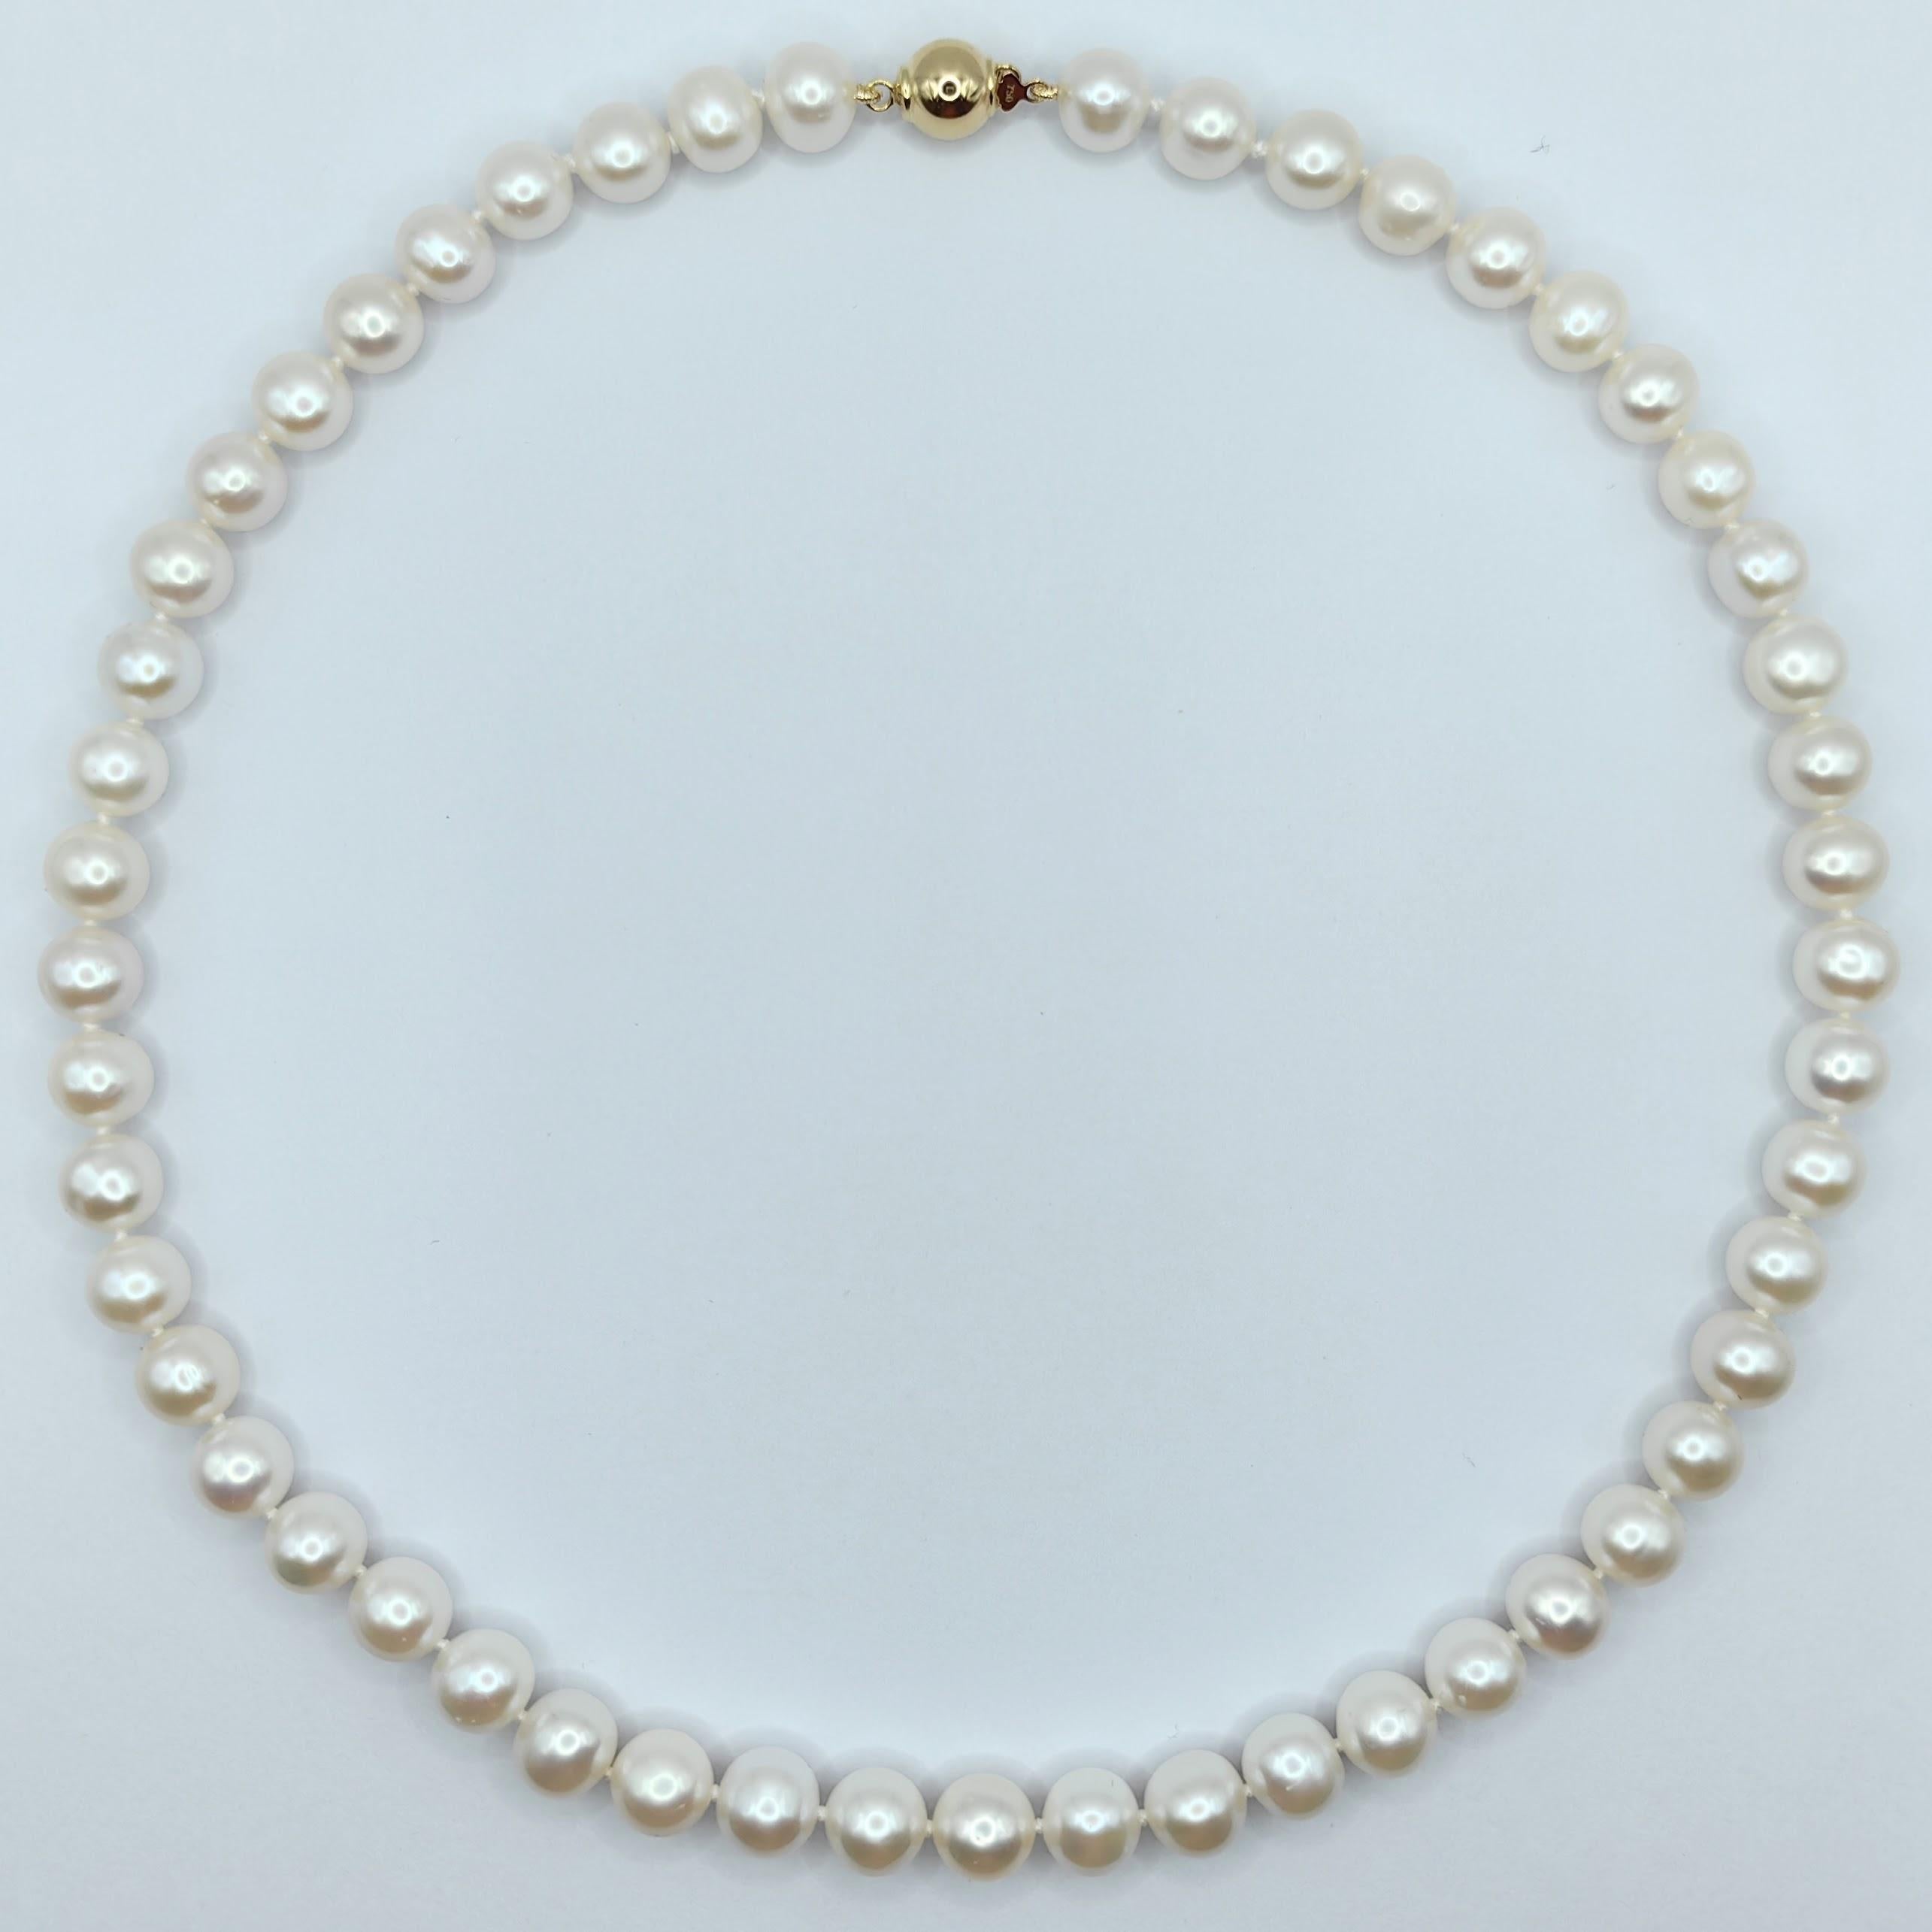 Introducing our exquisite 18-inch 7-8mm White Round Pearl Necklace with an 18K Gold Clasp, a timeless and elegant accessory that exudes sophistication and grace. Crafted with meticulous attention to detail, this hand-knotted necklace showcases the